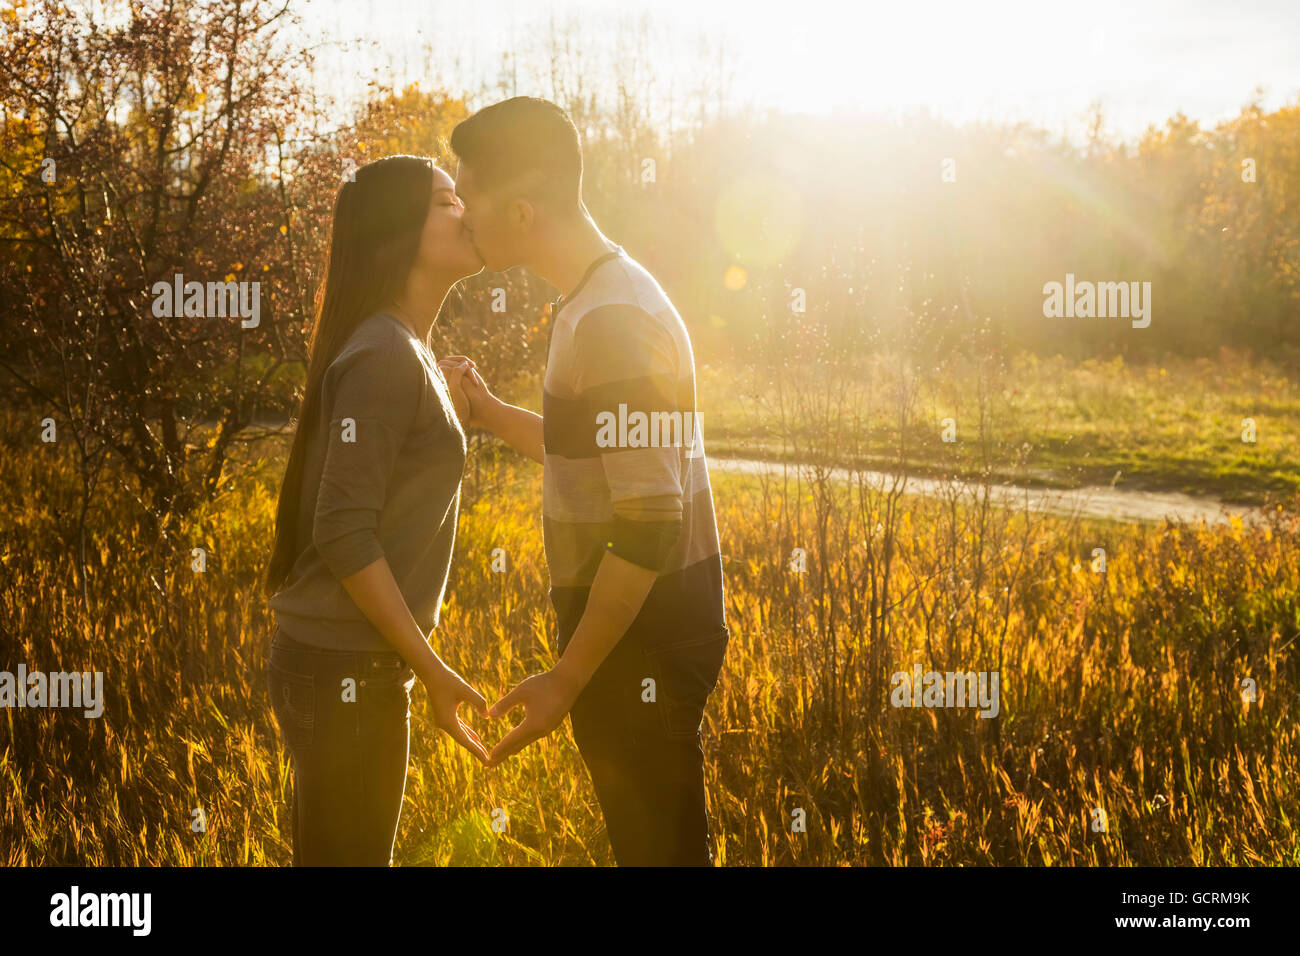 A Young Asian Couple Kissing In A Park In Autumn And Making A Heart